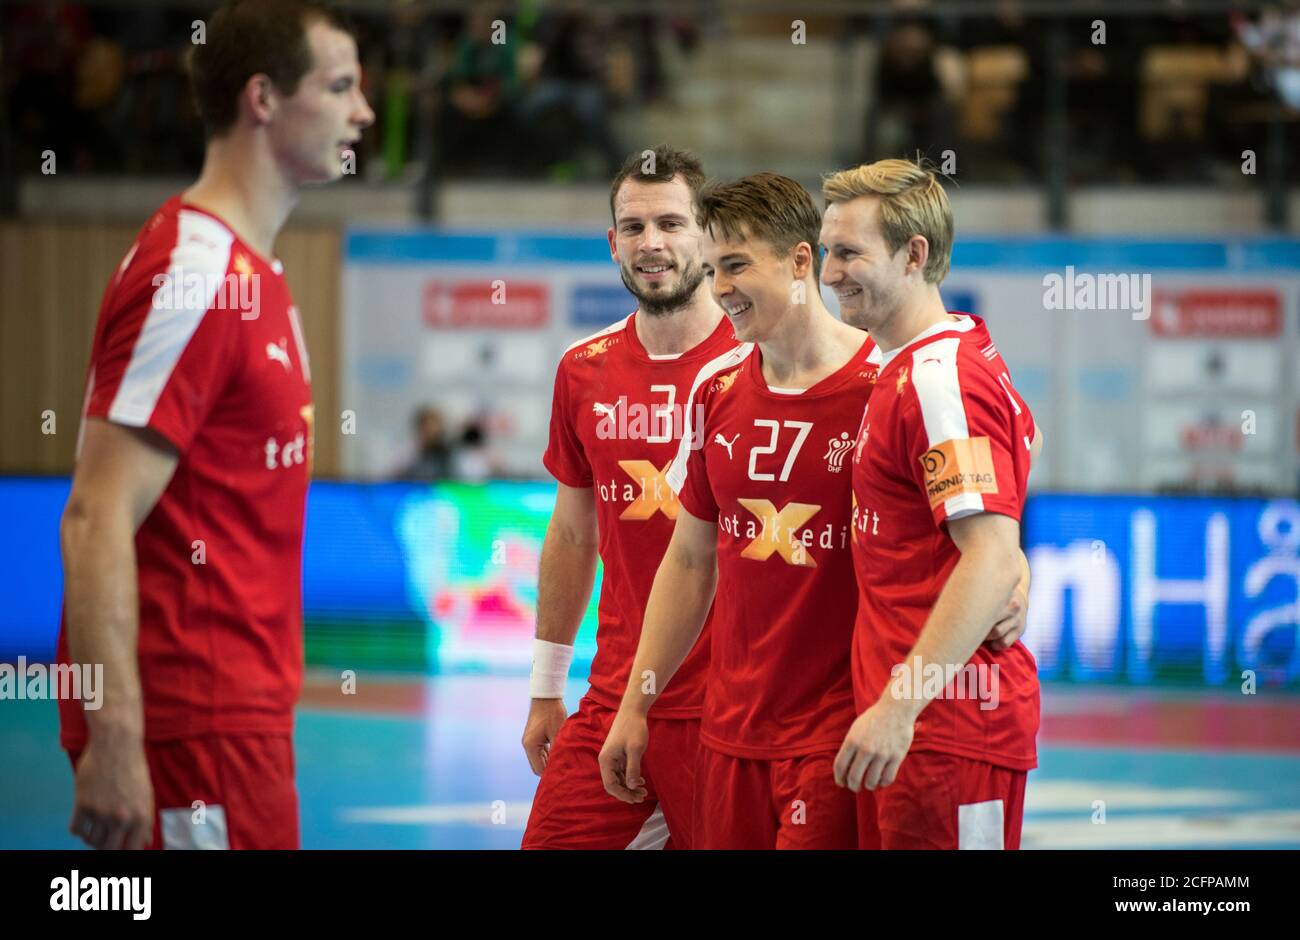 Tænke Ugle kirurg The Danish players Mads Christiansen (3), Michael Damgaard Nielsen (27) and  Peter Balling Christensen (29) celebrate the 33-28 victory over Norway at  the Golden League tournament in Oslo (Gonzales Photo/Jan-Erik Eriksen).  Oslo,